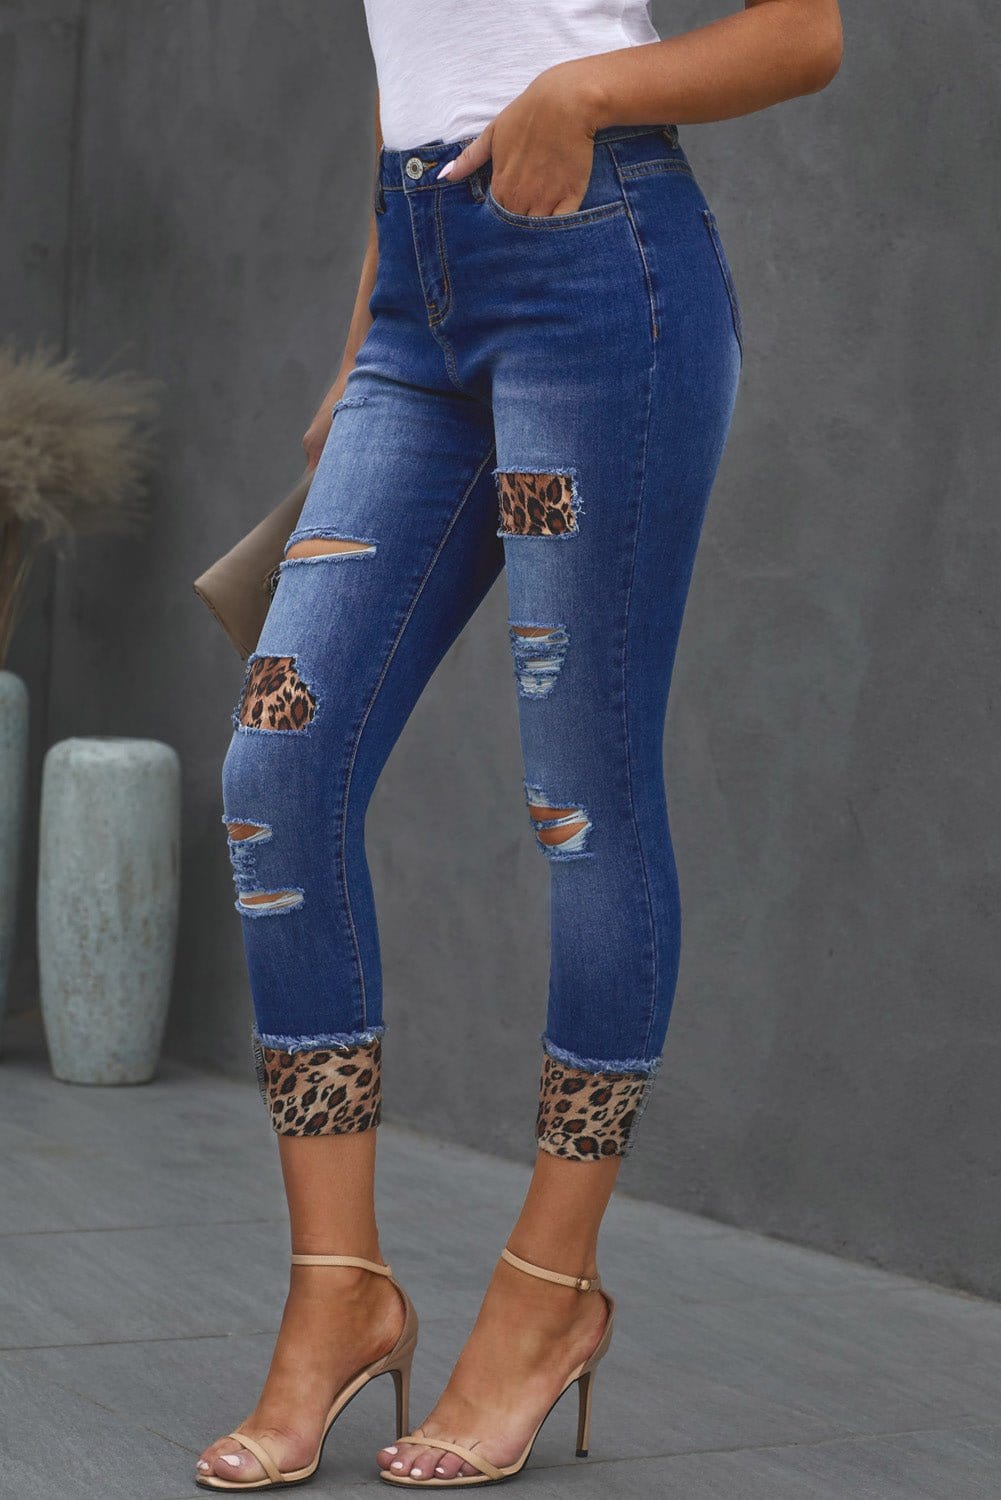 Baeful Leopard Patch Distressed Cropped Jeans - CLASSY CLOSET BOUTIQUEBaeful Leopard Patch Distressed Cropped Jeanspants100100251022713100100251022713BlueS